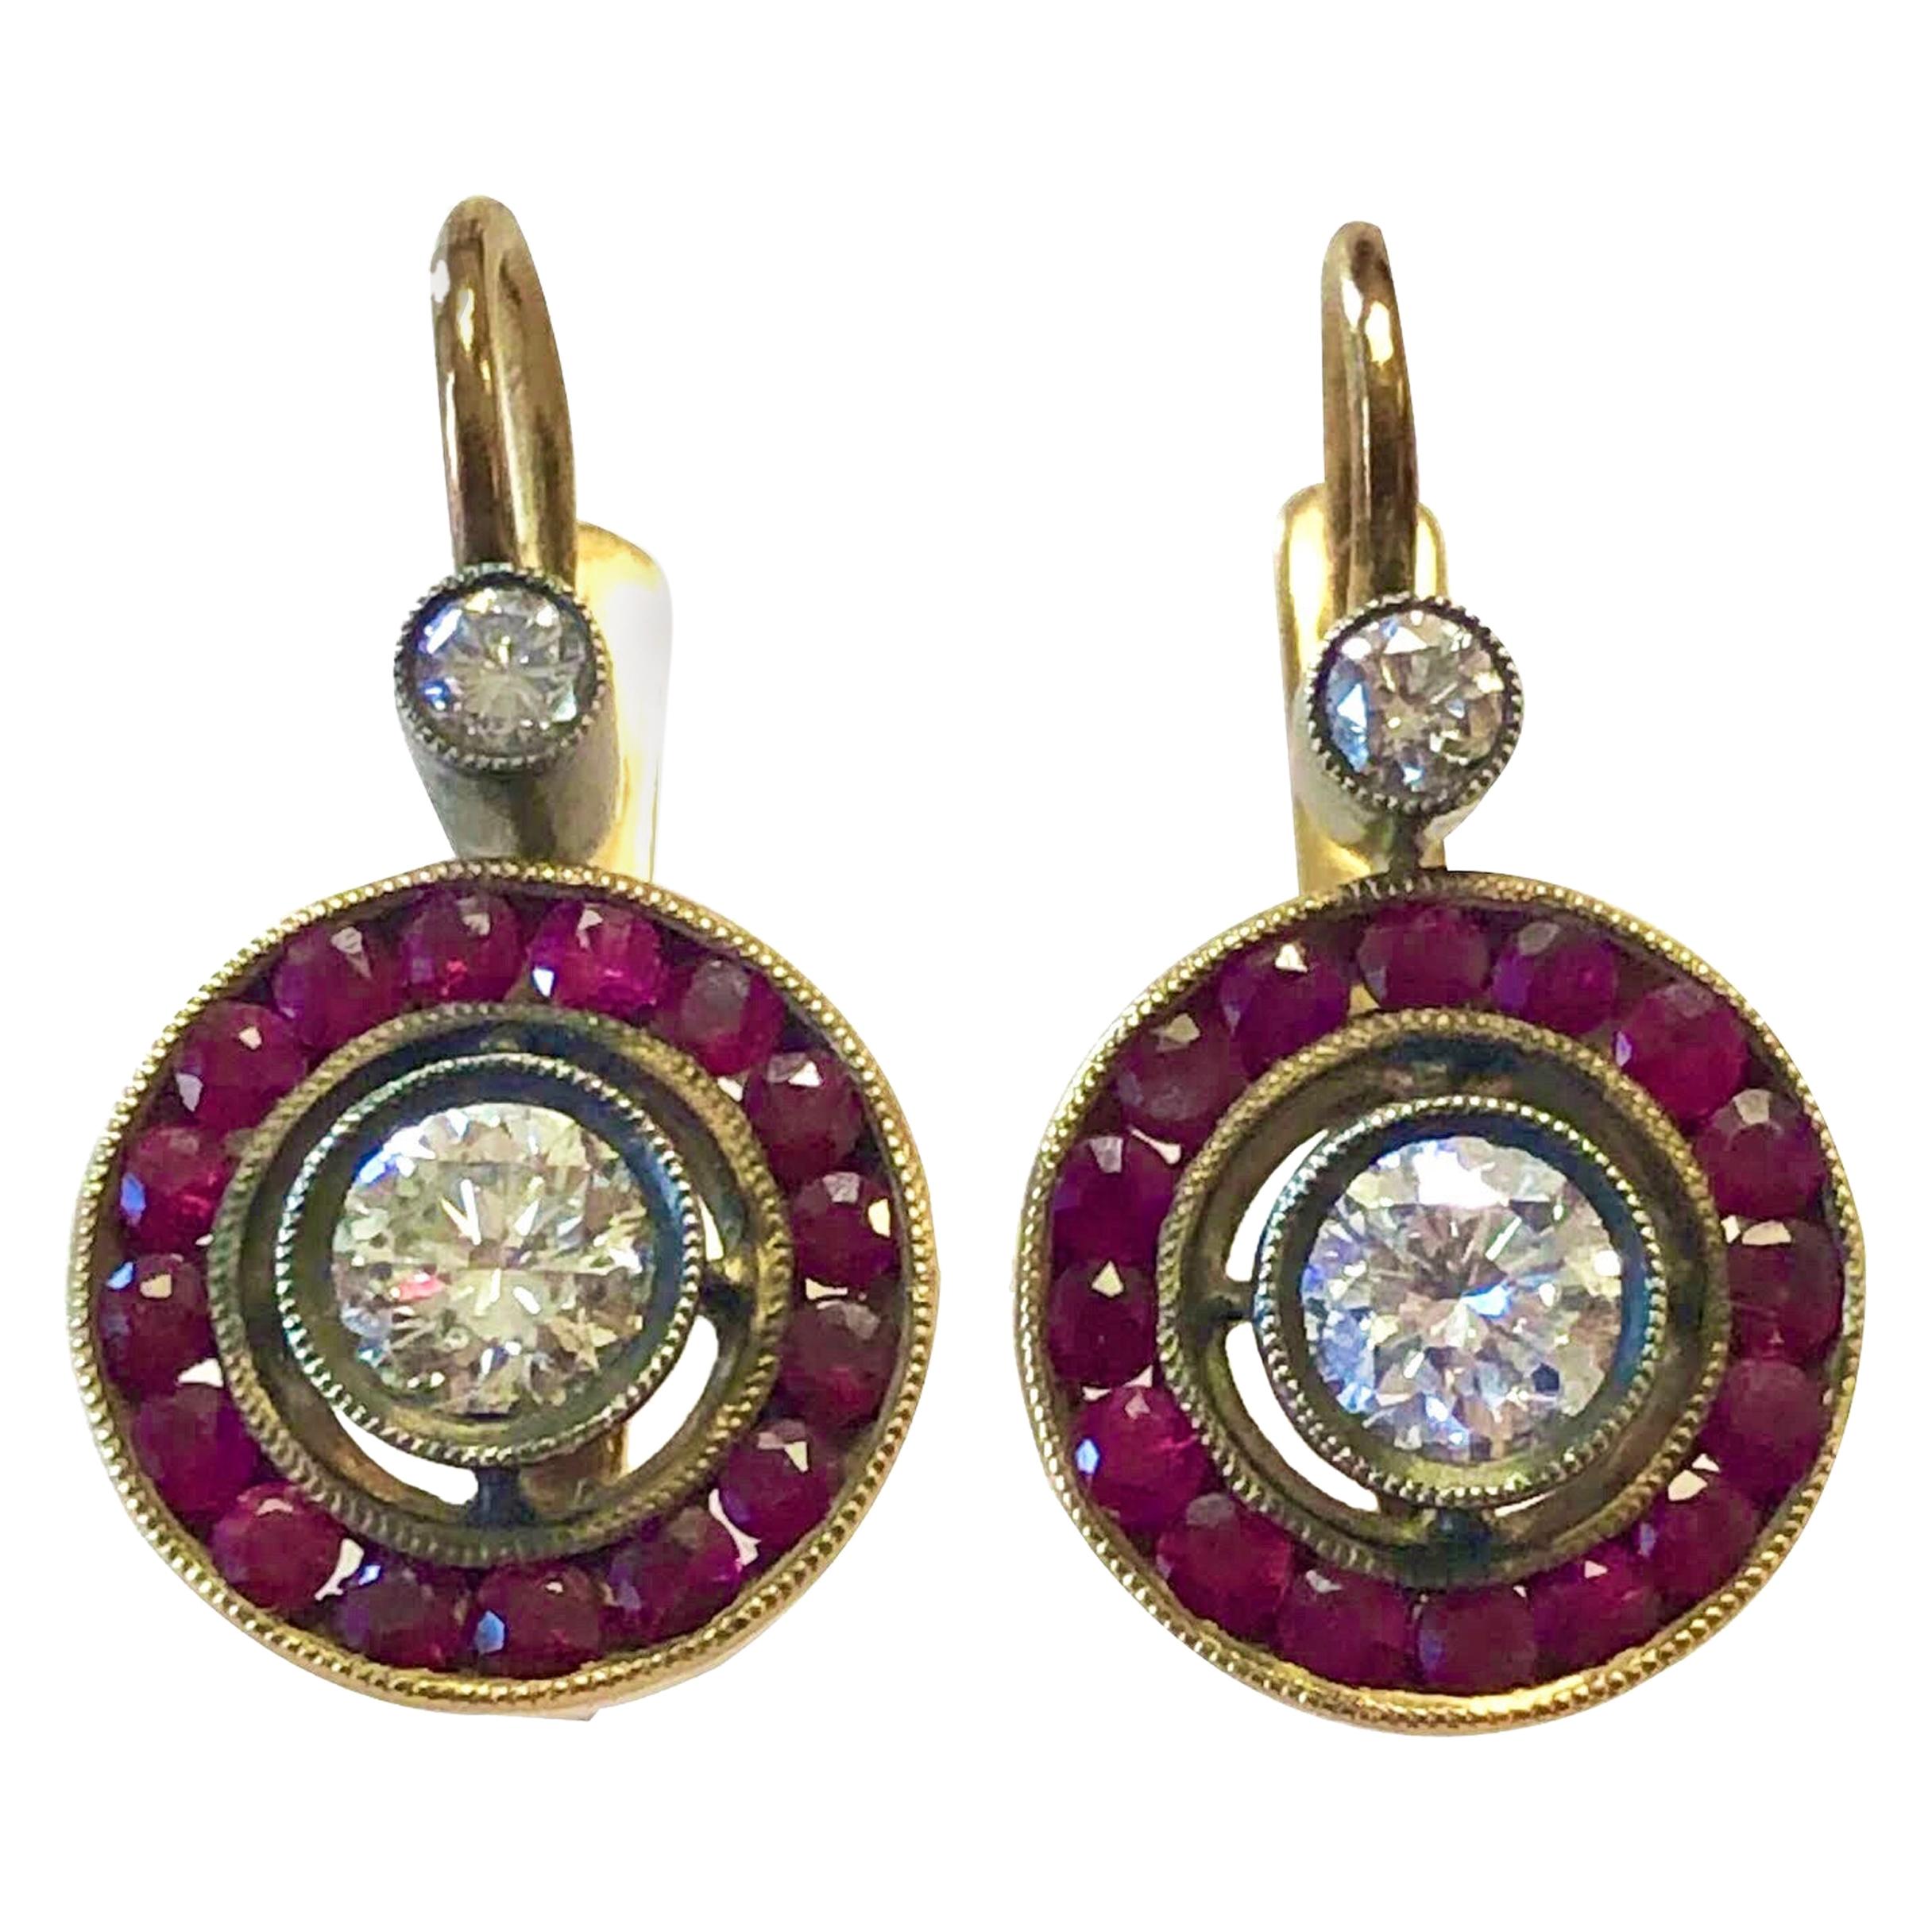 Edwardian Gold Silver Ruby and Diamond Earrings